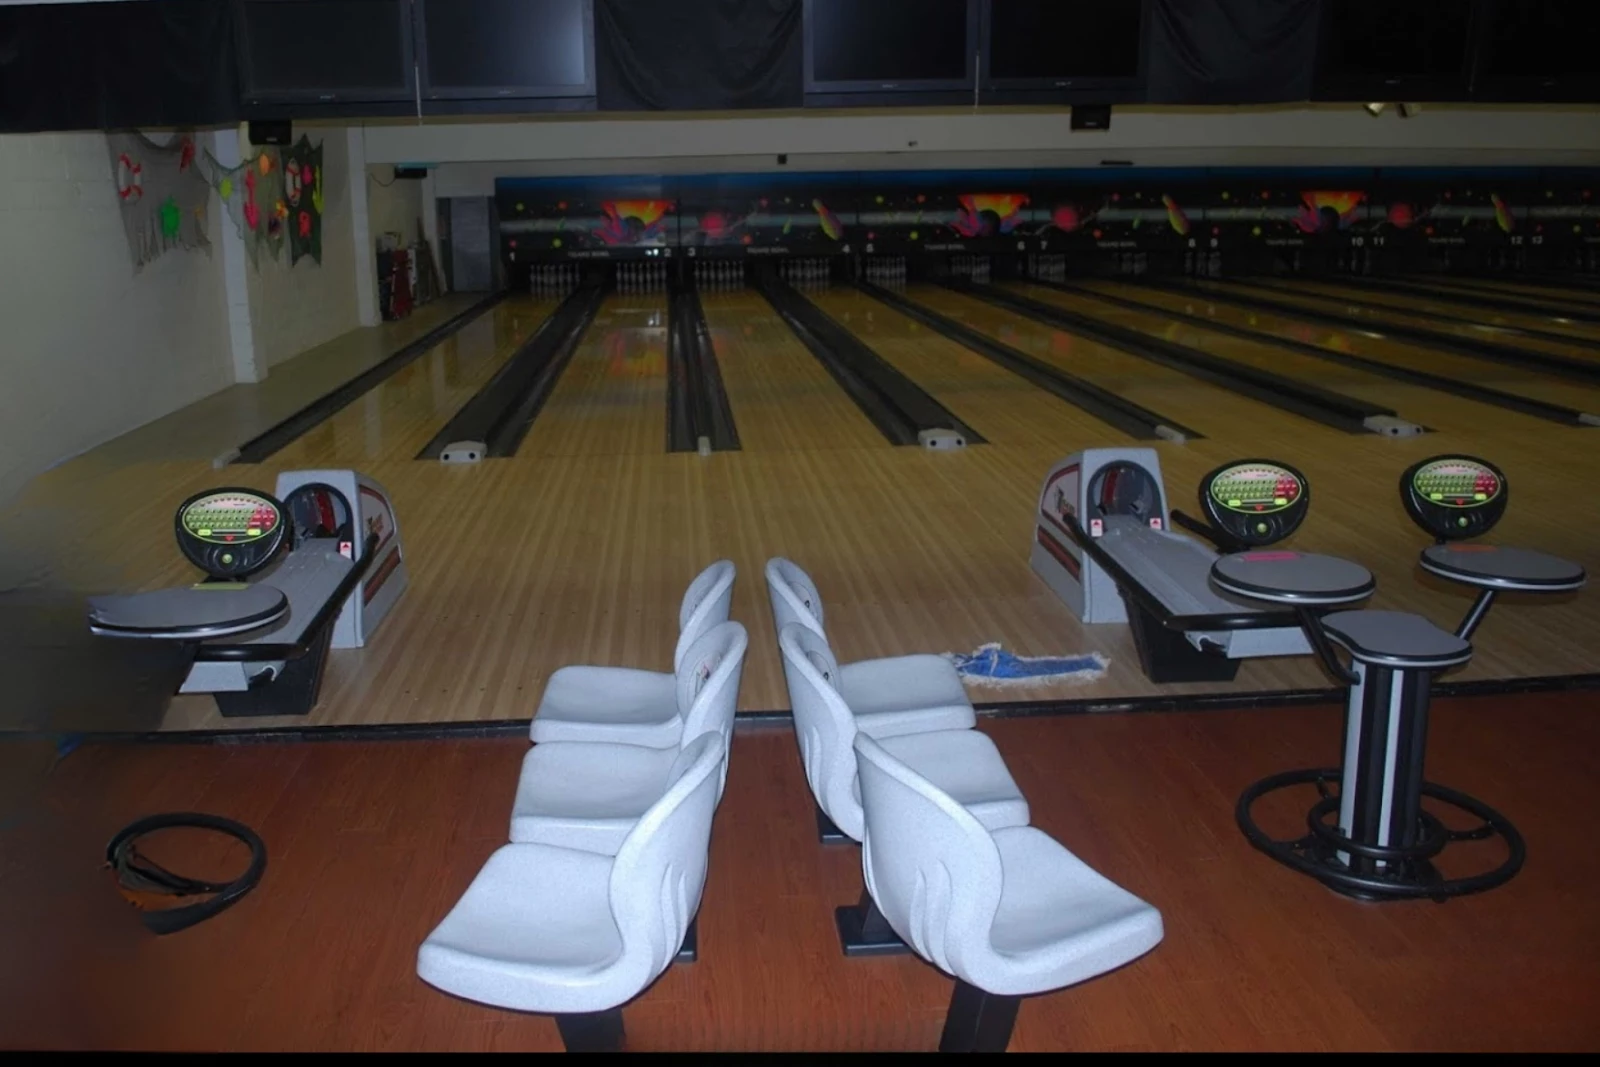 Tigard Bowl is the oldest bowling alley in Oregon